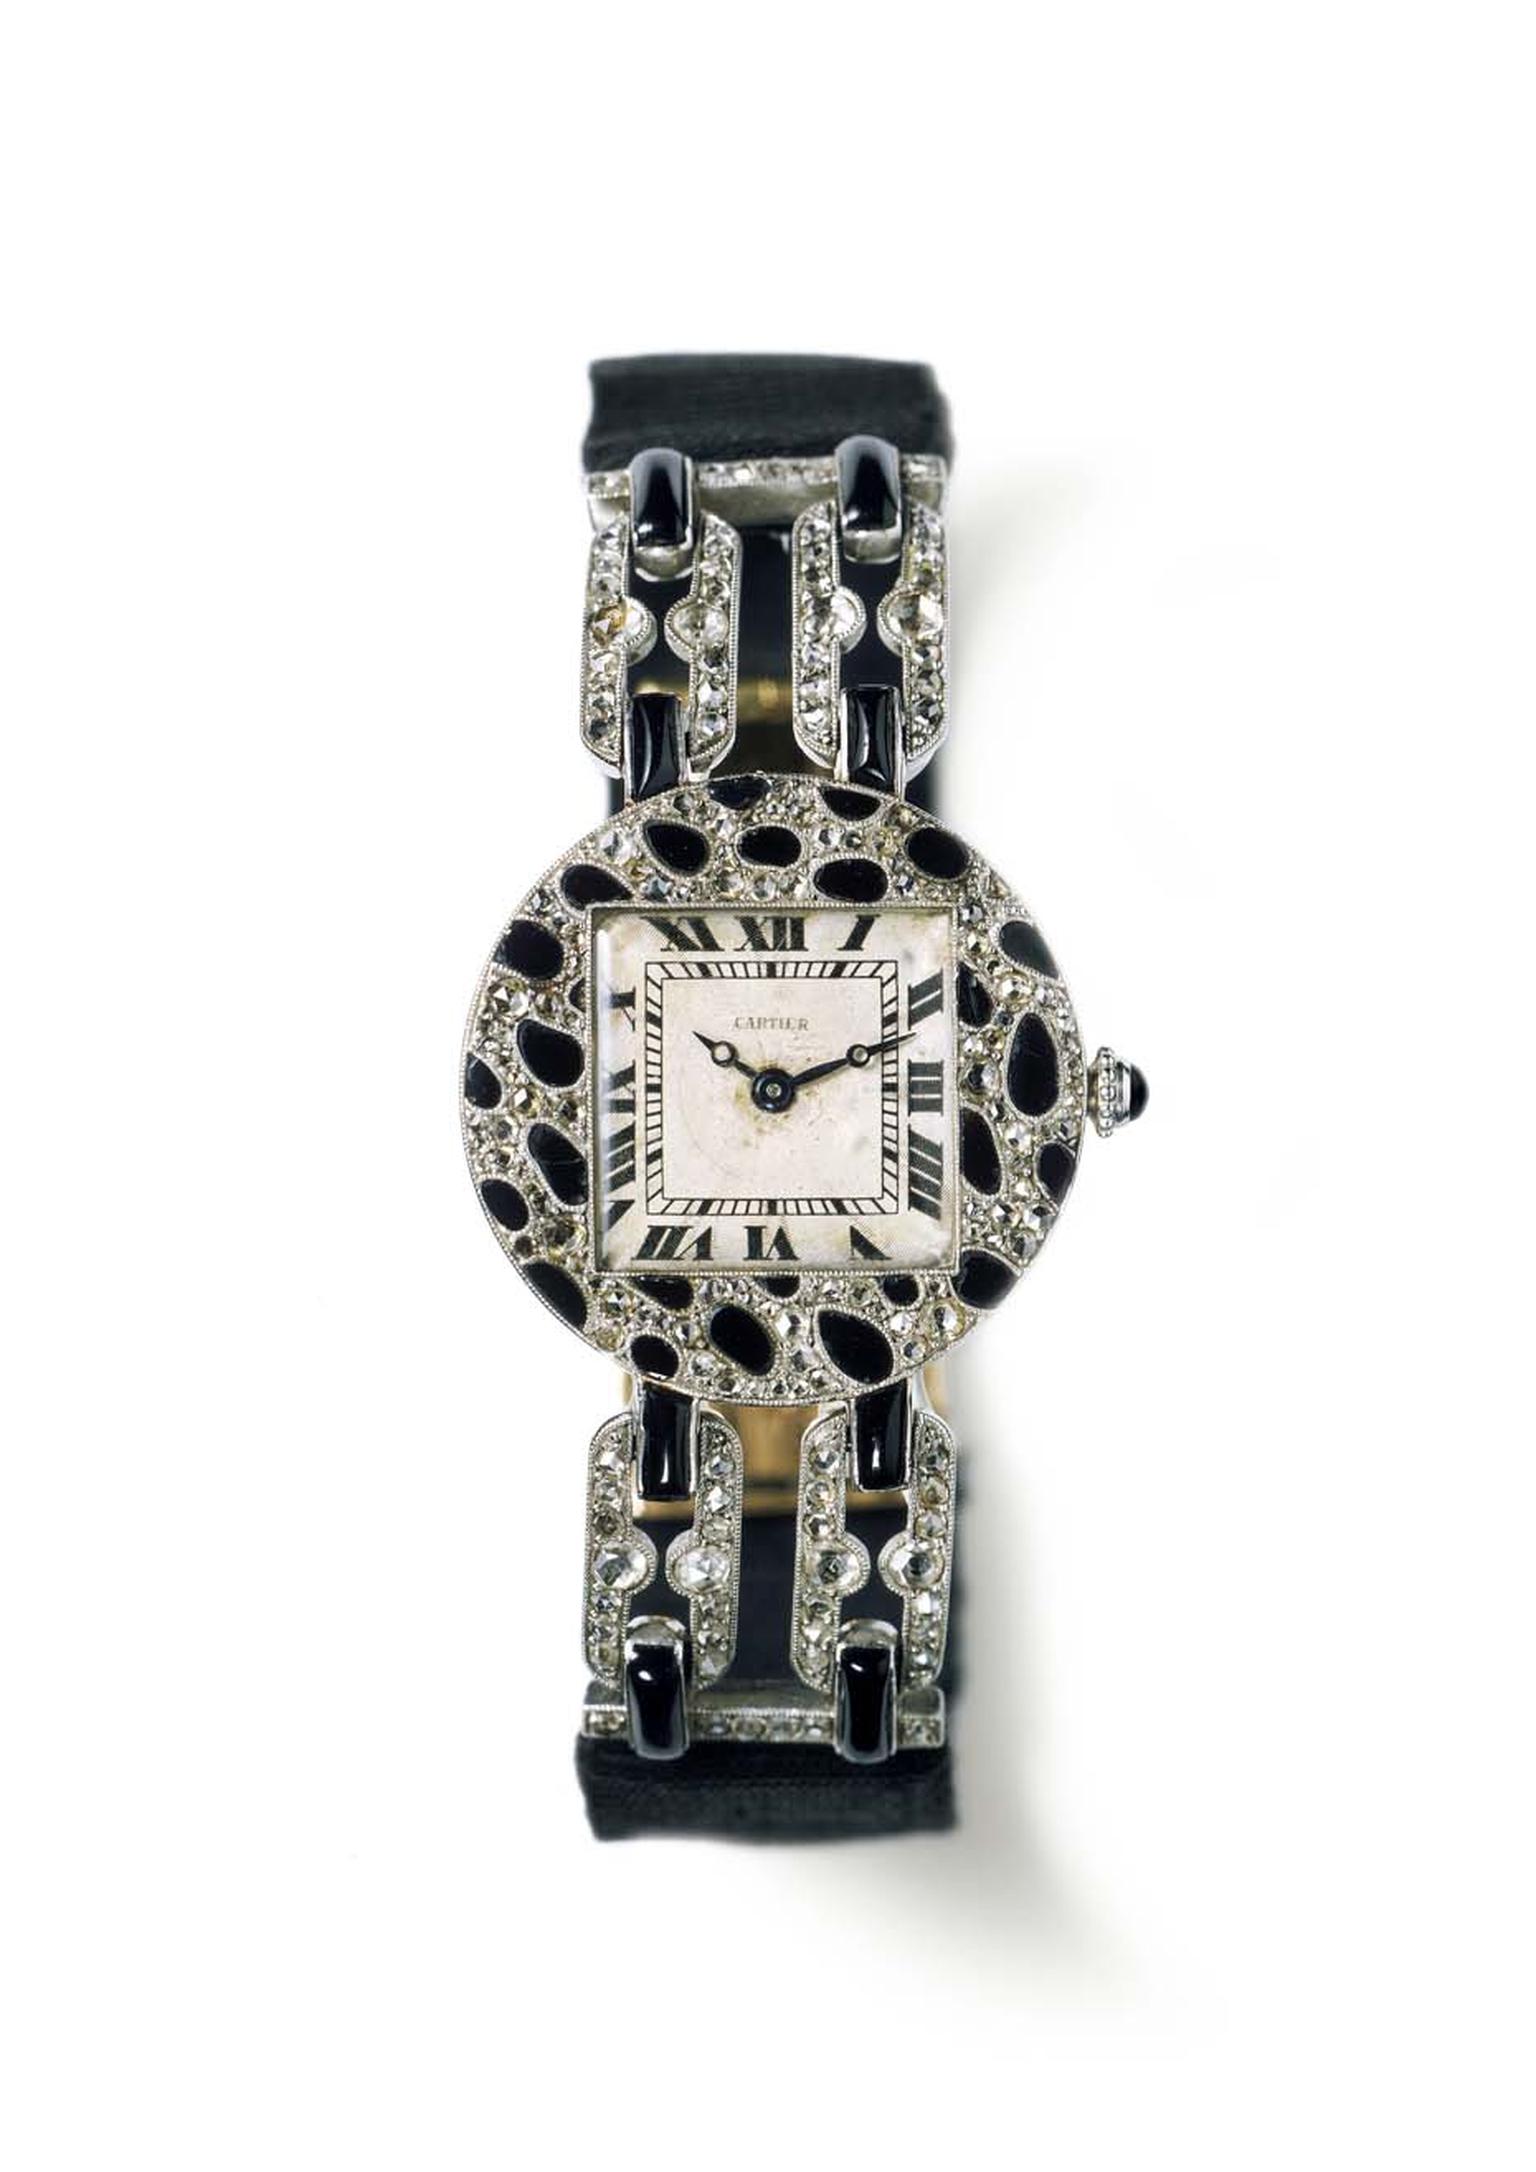 Cartier 1914 wristwatch with panther-spots motif features a